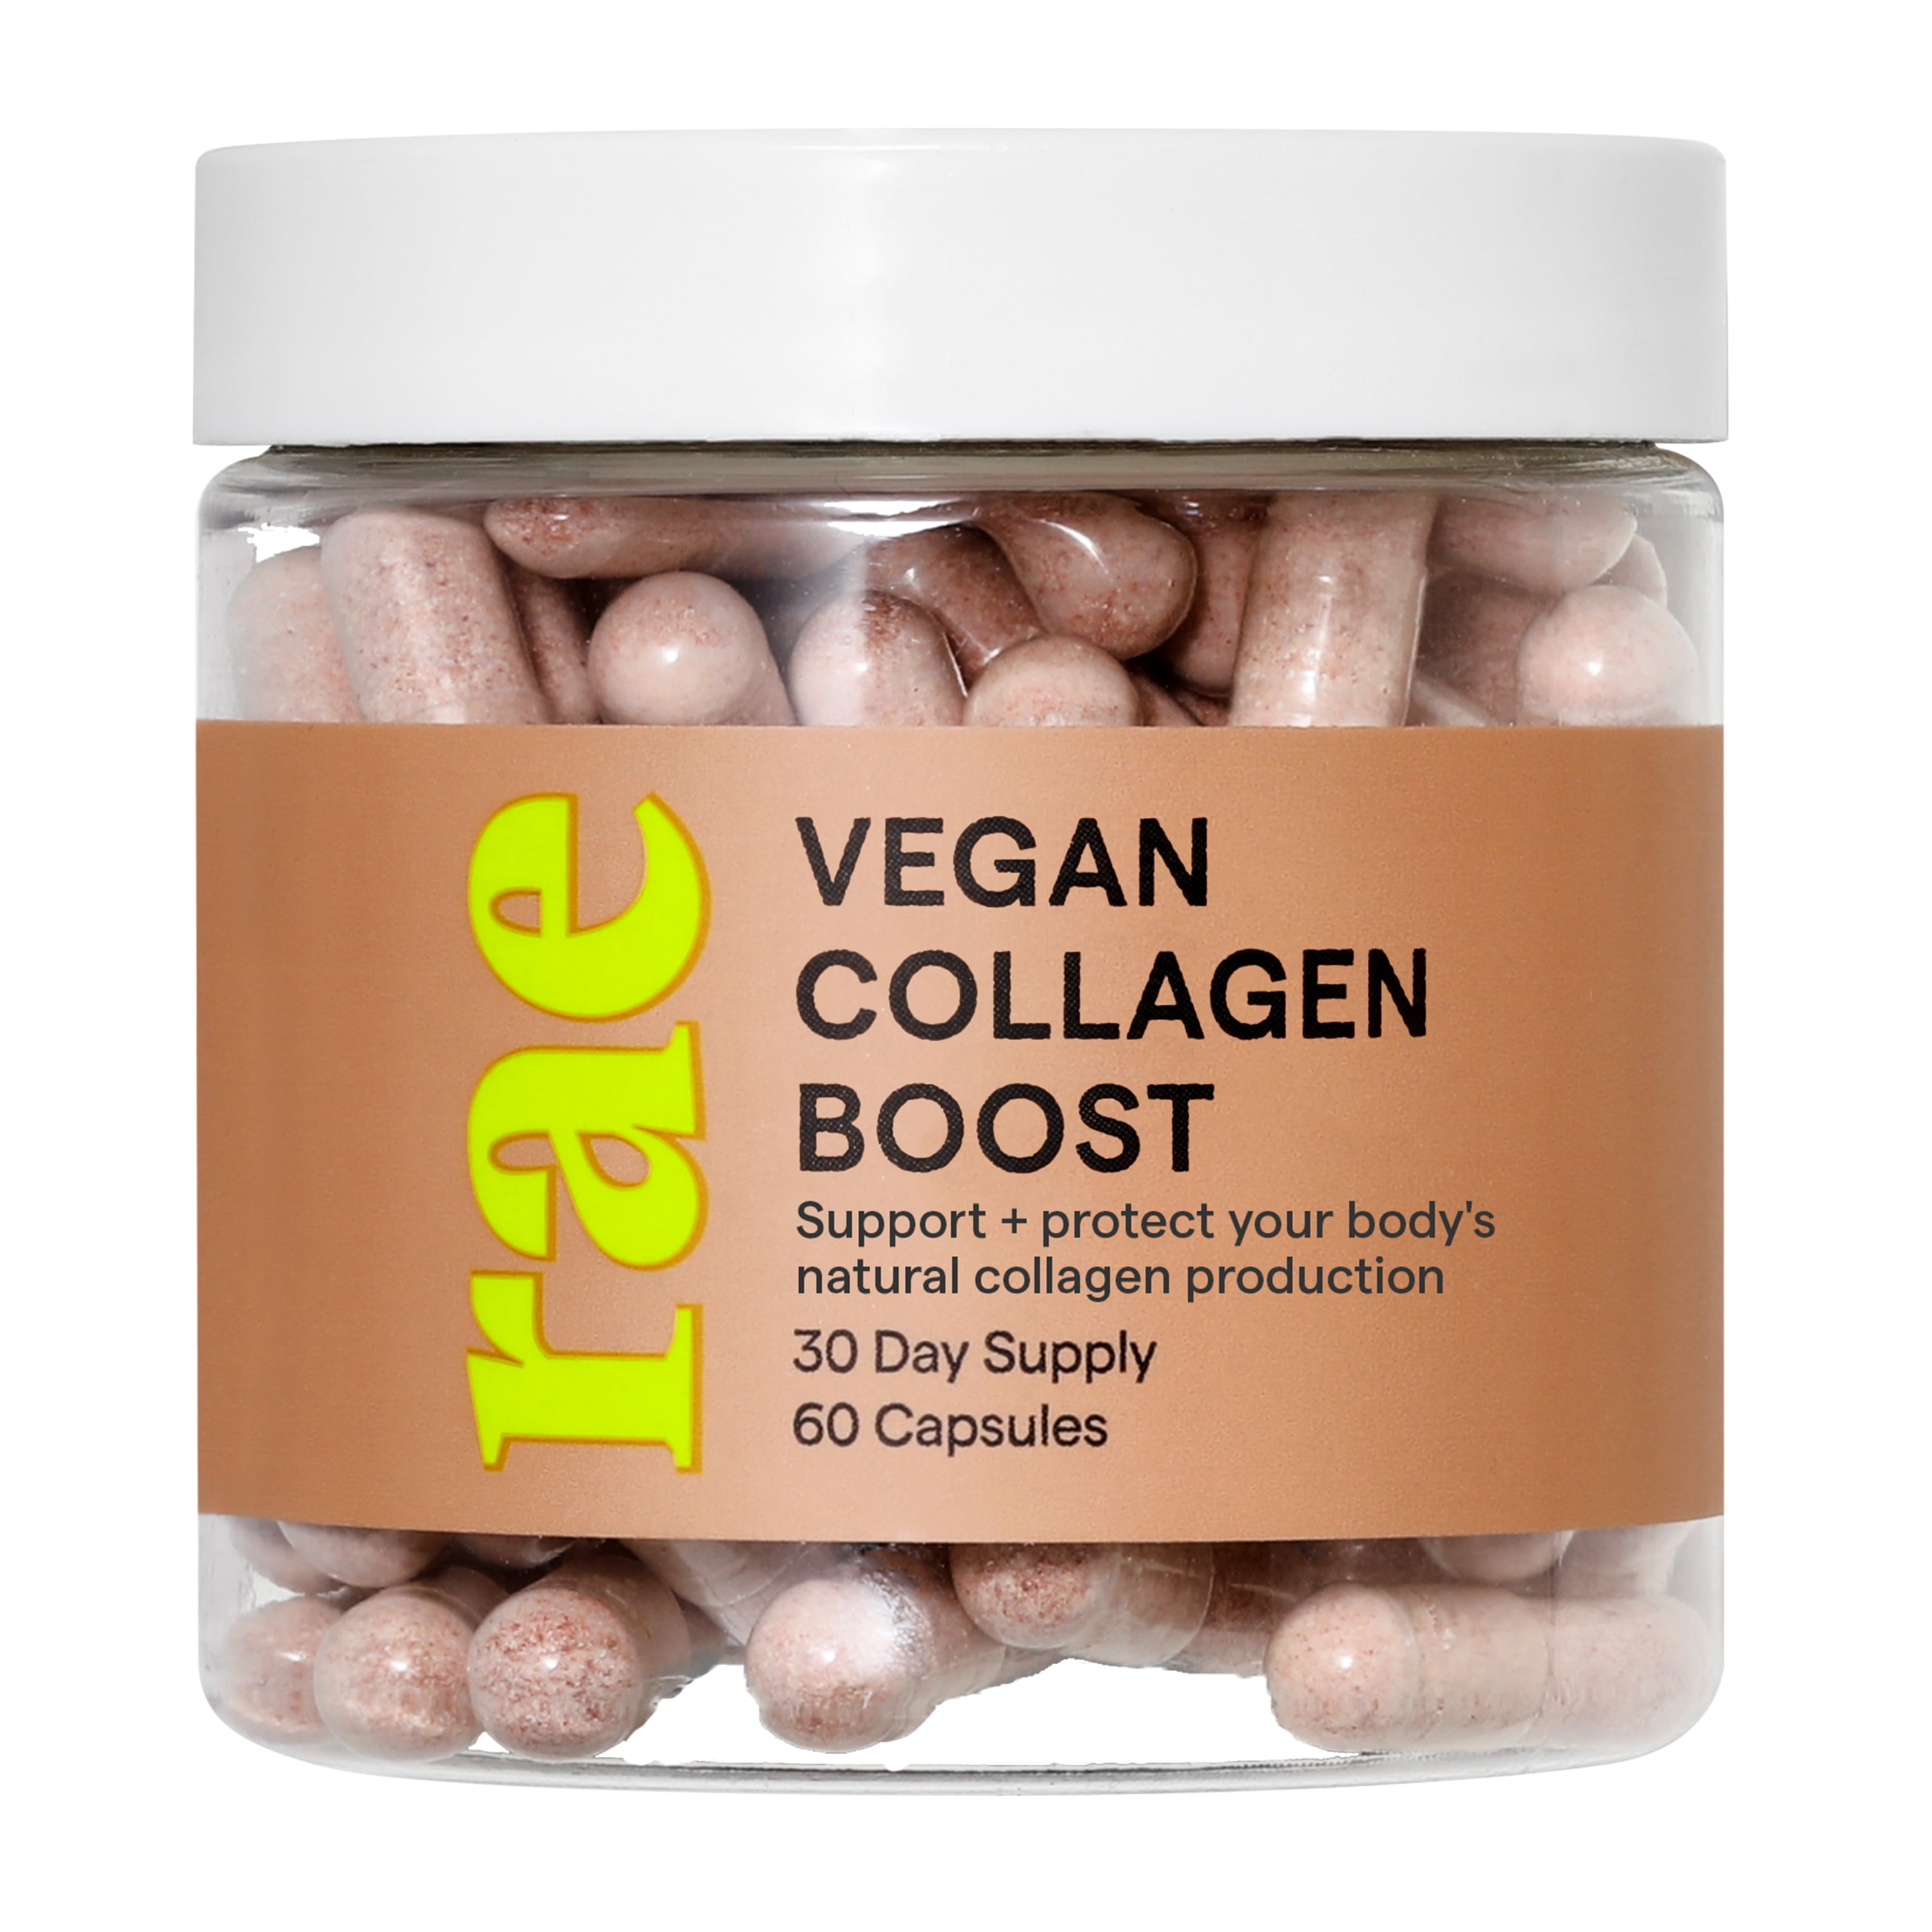 Rae Vegan Collagen Boost Supplement with Vitamin C, Support Hair, Skin & Nails, 60ct